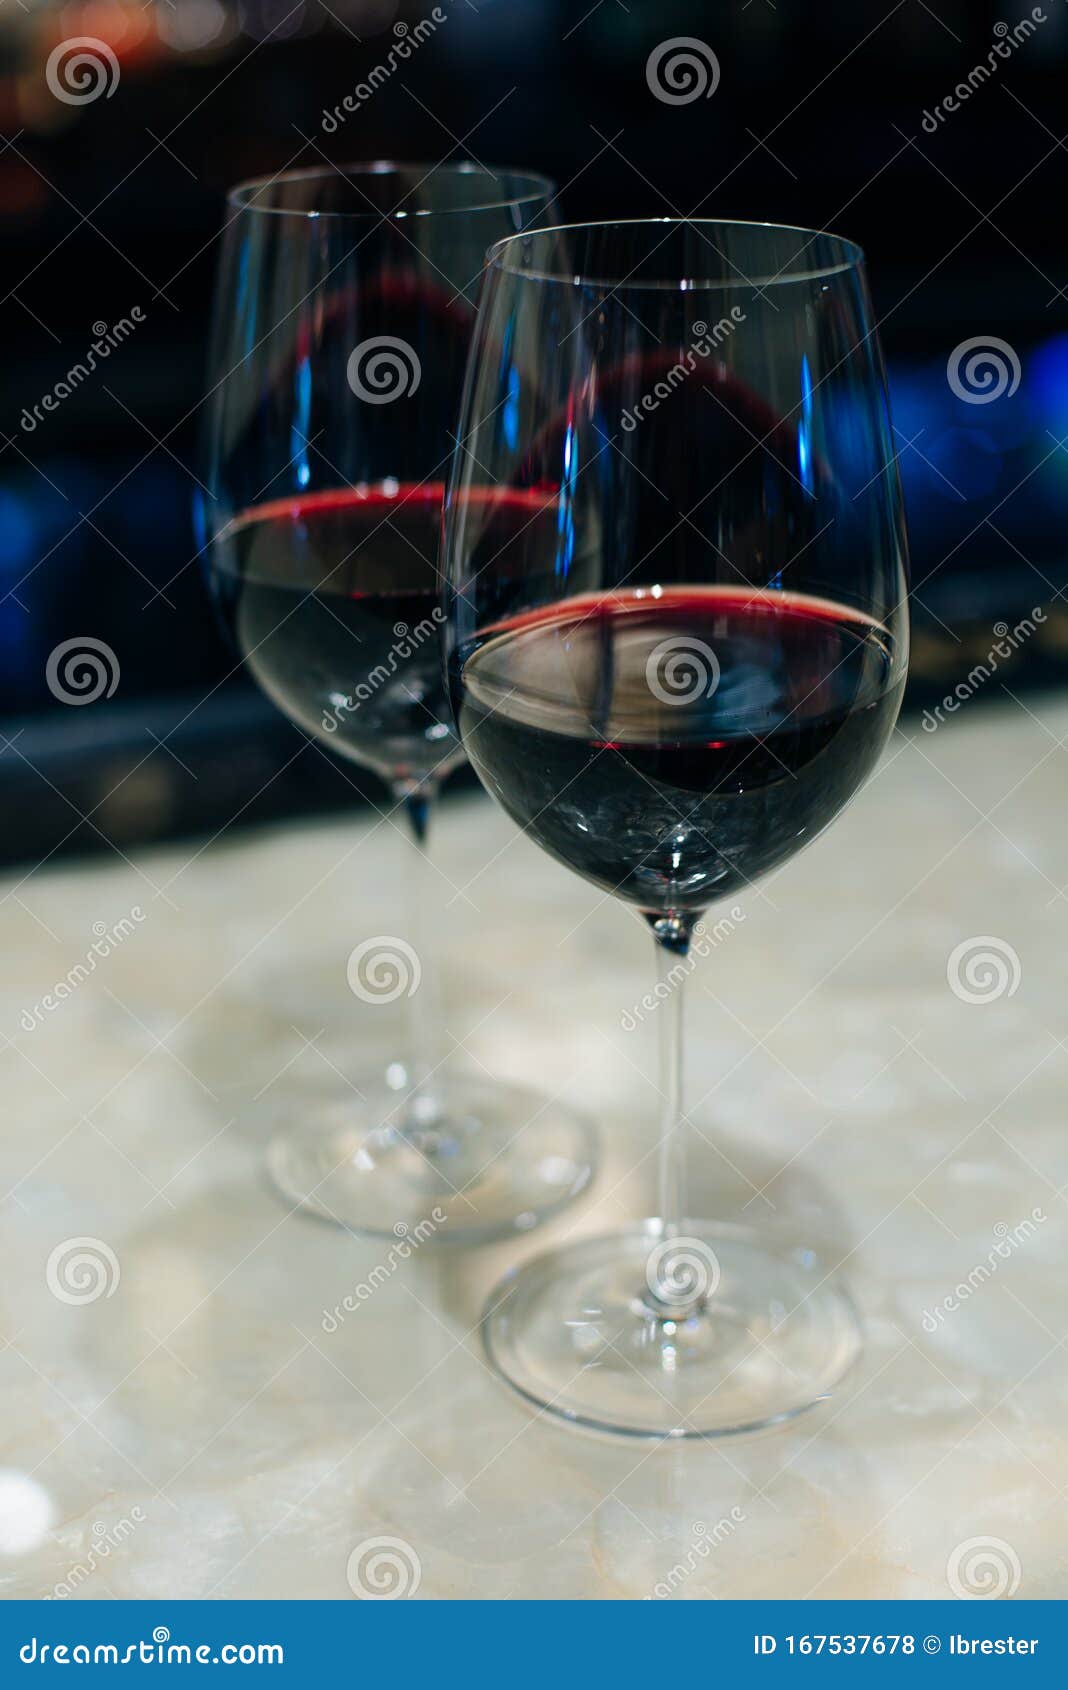 glasses with red wine on bar counter in restaurante